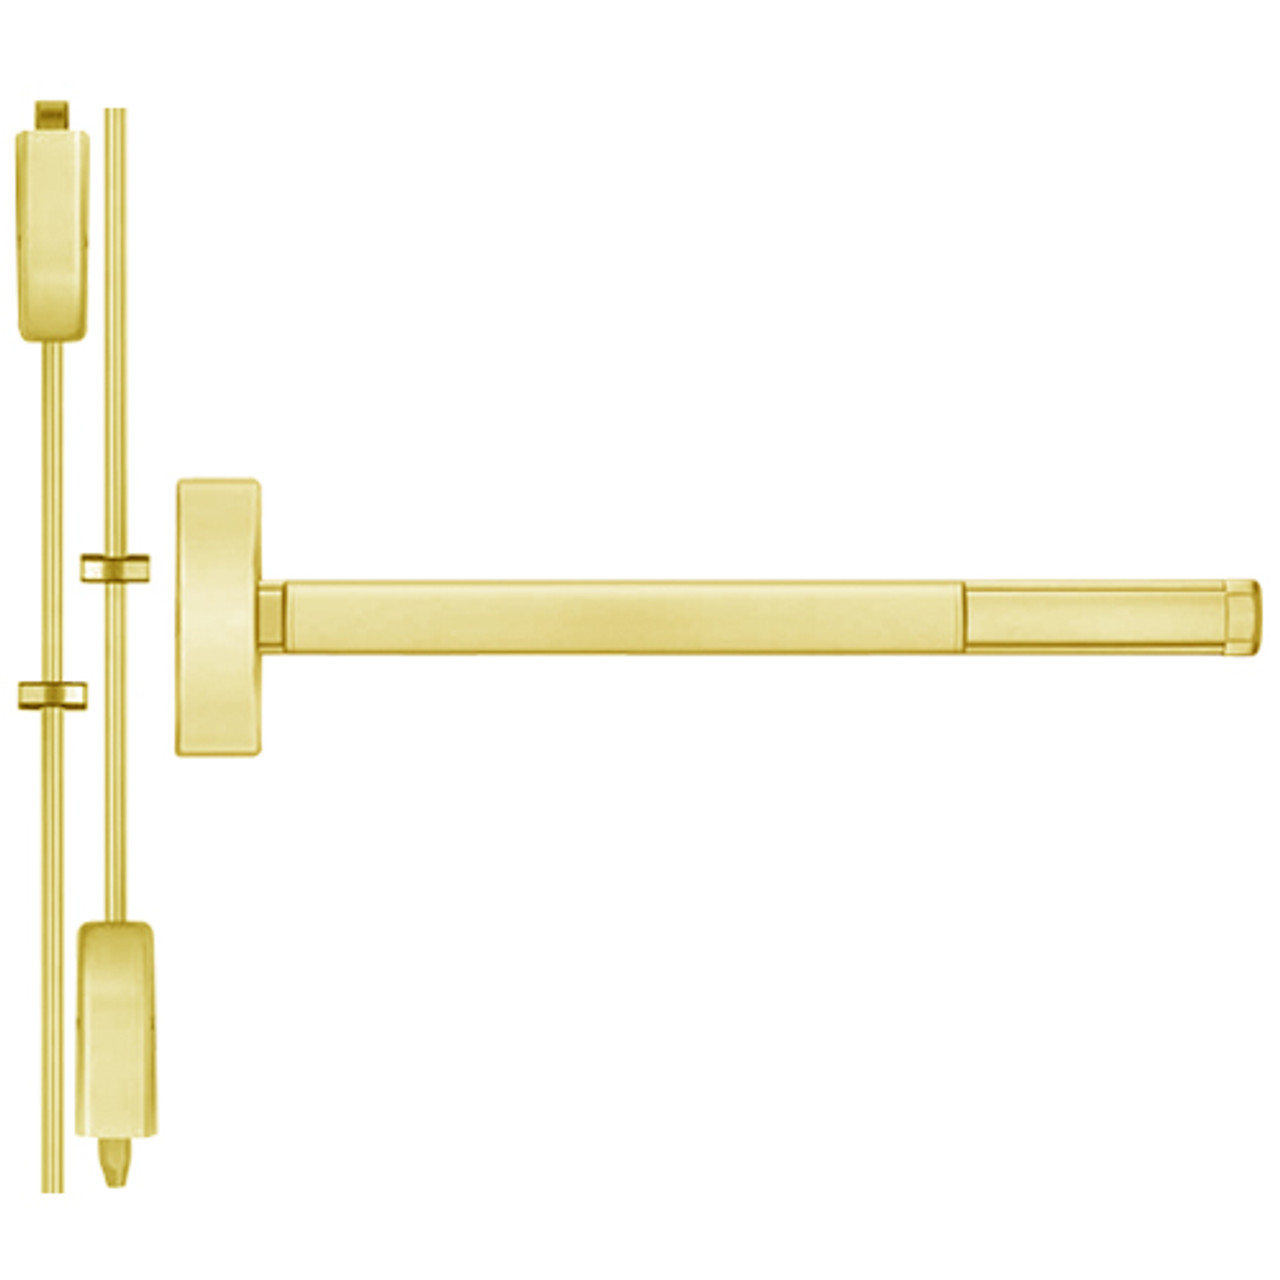 TSFL2205LBR-605-36 PHI 2200 Series Apex Surface Vertical Rod Device with Touchbar Monitoring Switch Prepped for Key Controls Thumb Piece in Bright Brass Finish